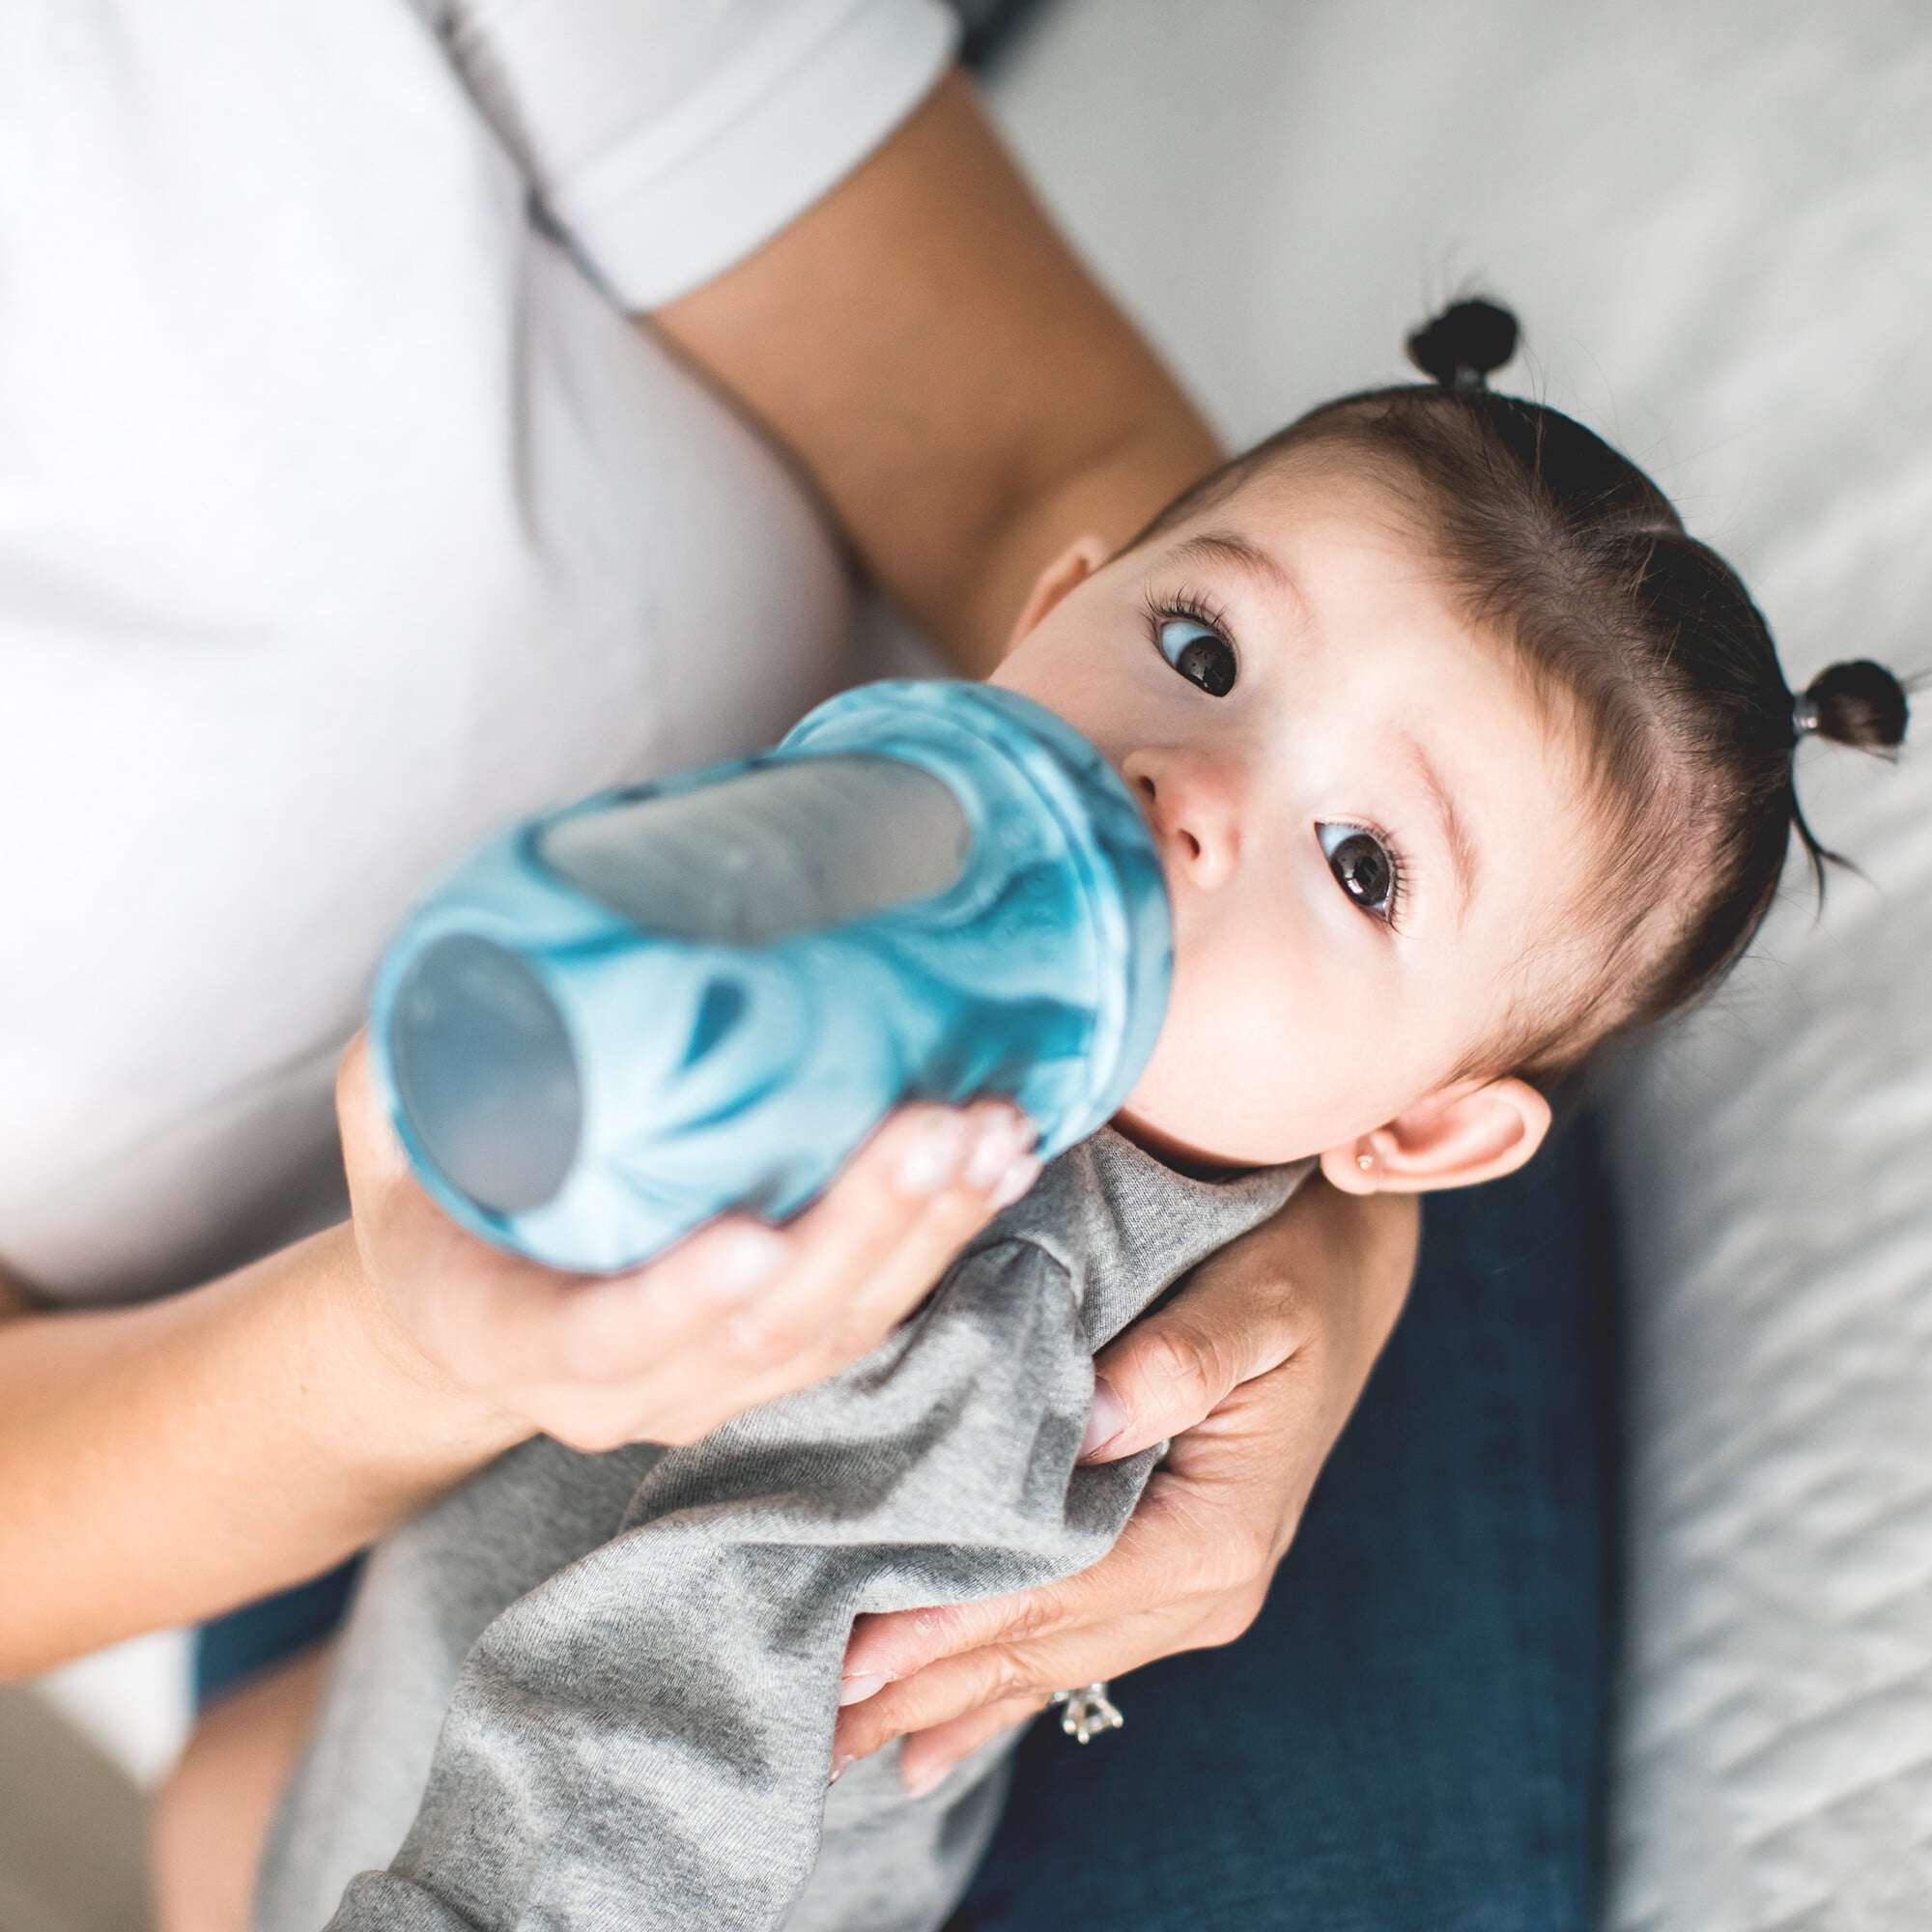 The Only Baby Bottle You Need : Boon NURSH